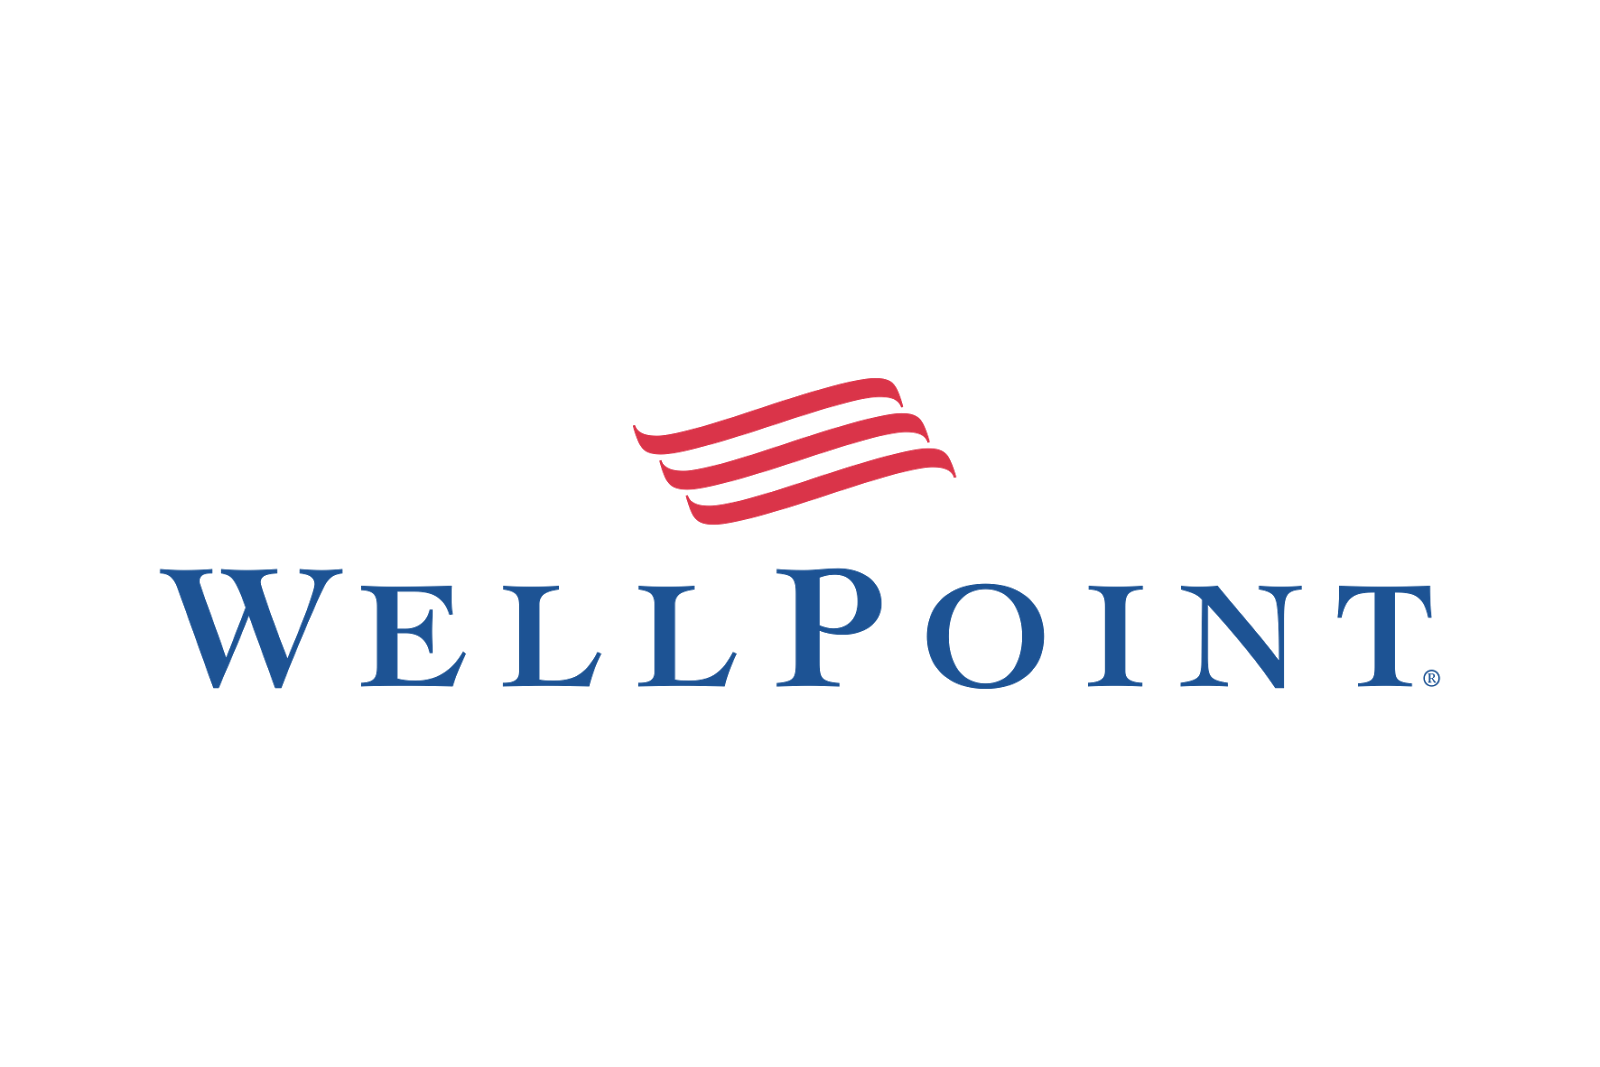 52wellpoint.png